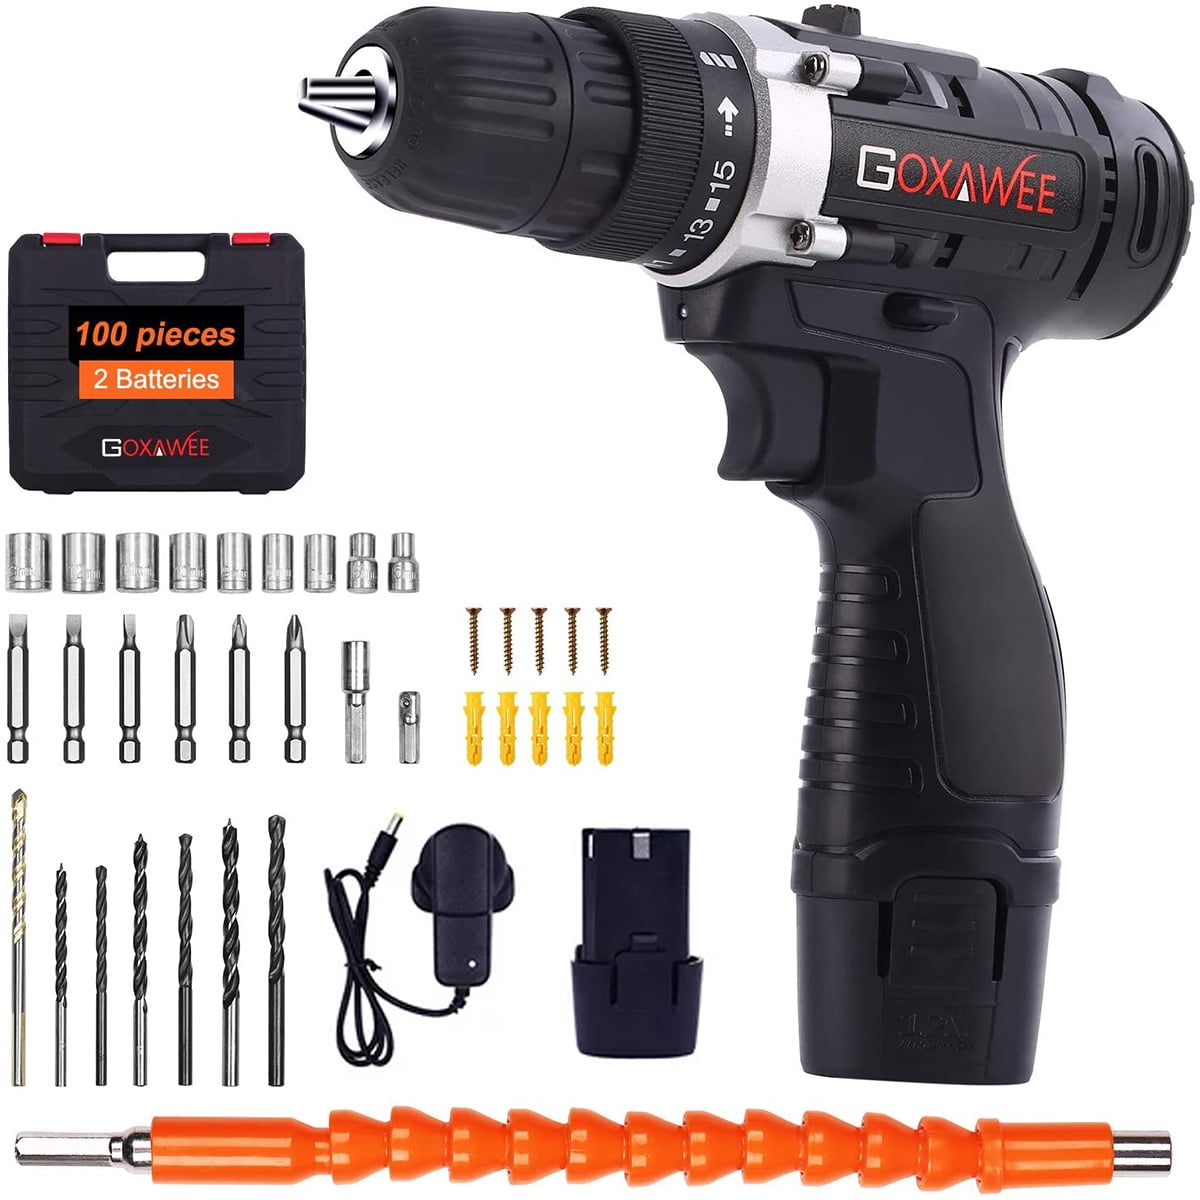 12V Cordless Drill/Driver With 50 Accessories Kitbox